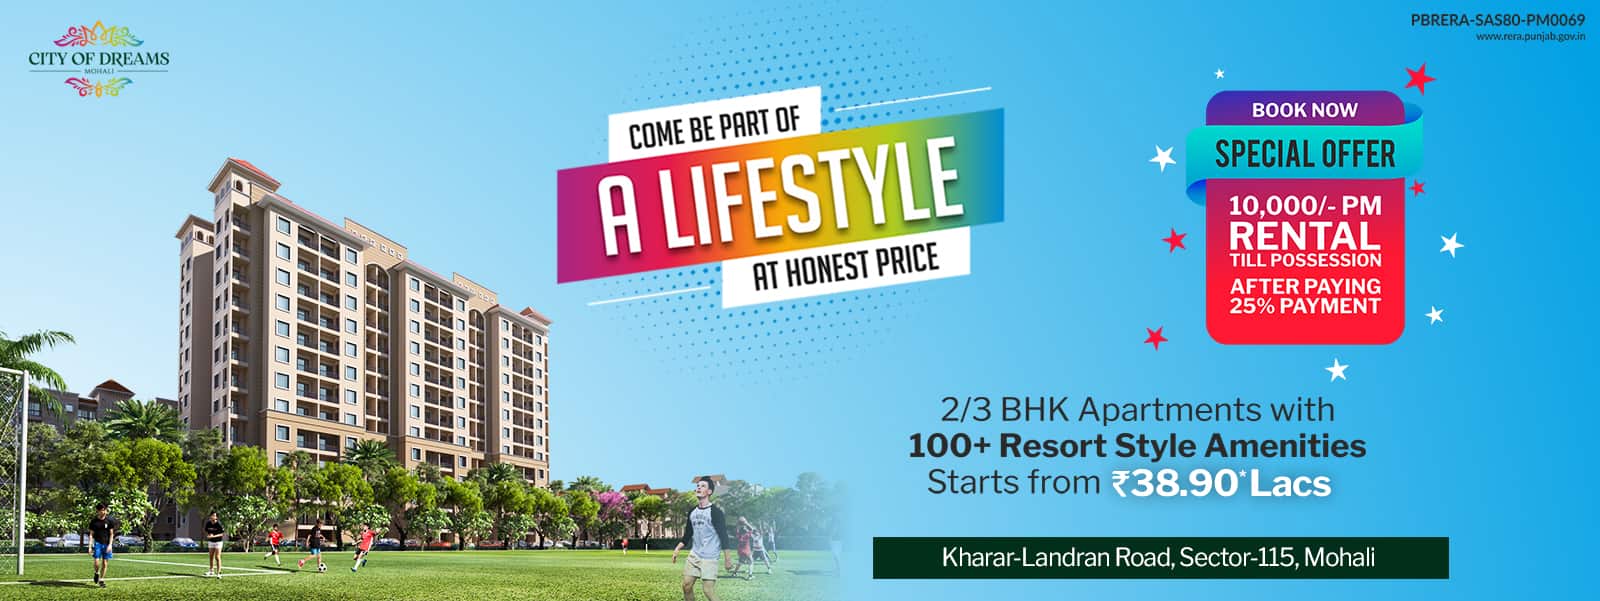 Book 2/3 BHK apartments with 100+ resort style amenities starts Rs 38.90 Lacs at SBP City of Dreams in Mohali Update